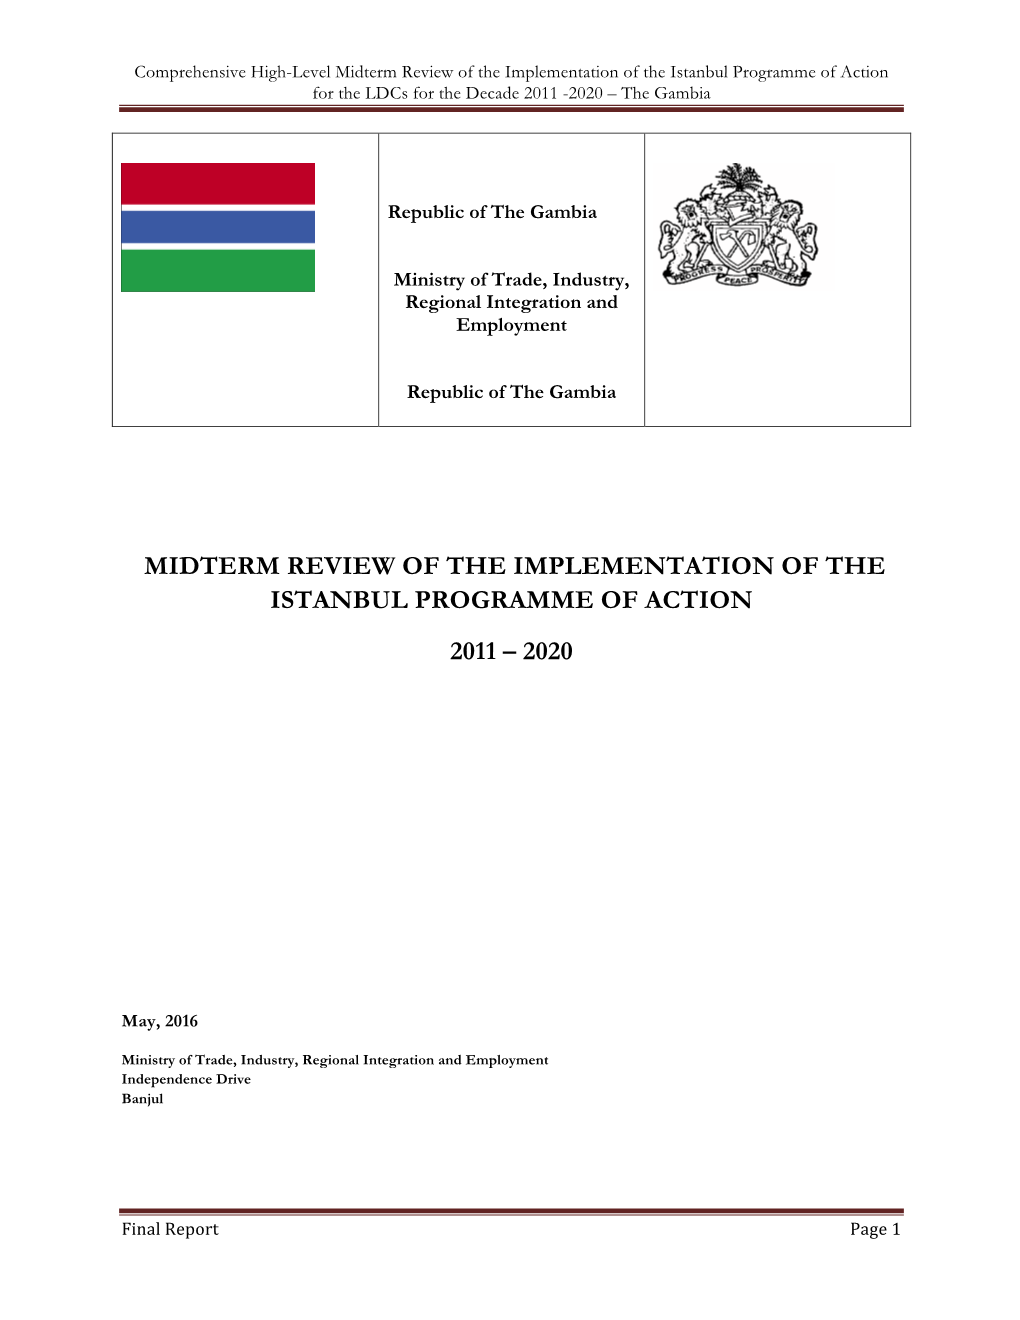 Midterm Review of the Implementation of the Istanbul Programme of Action for the Ldcs for the Decade 2011 -2020 – the Gambia